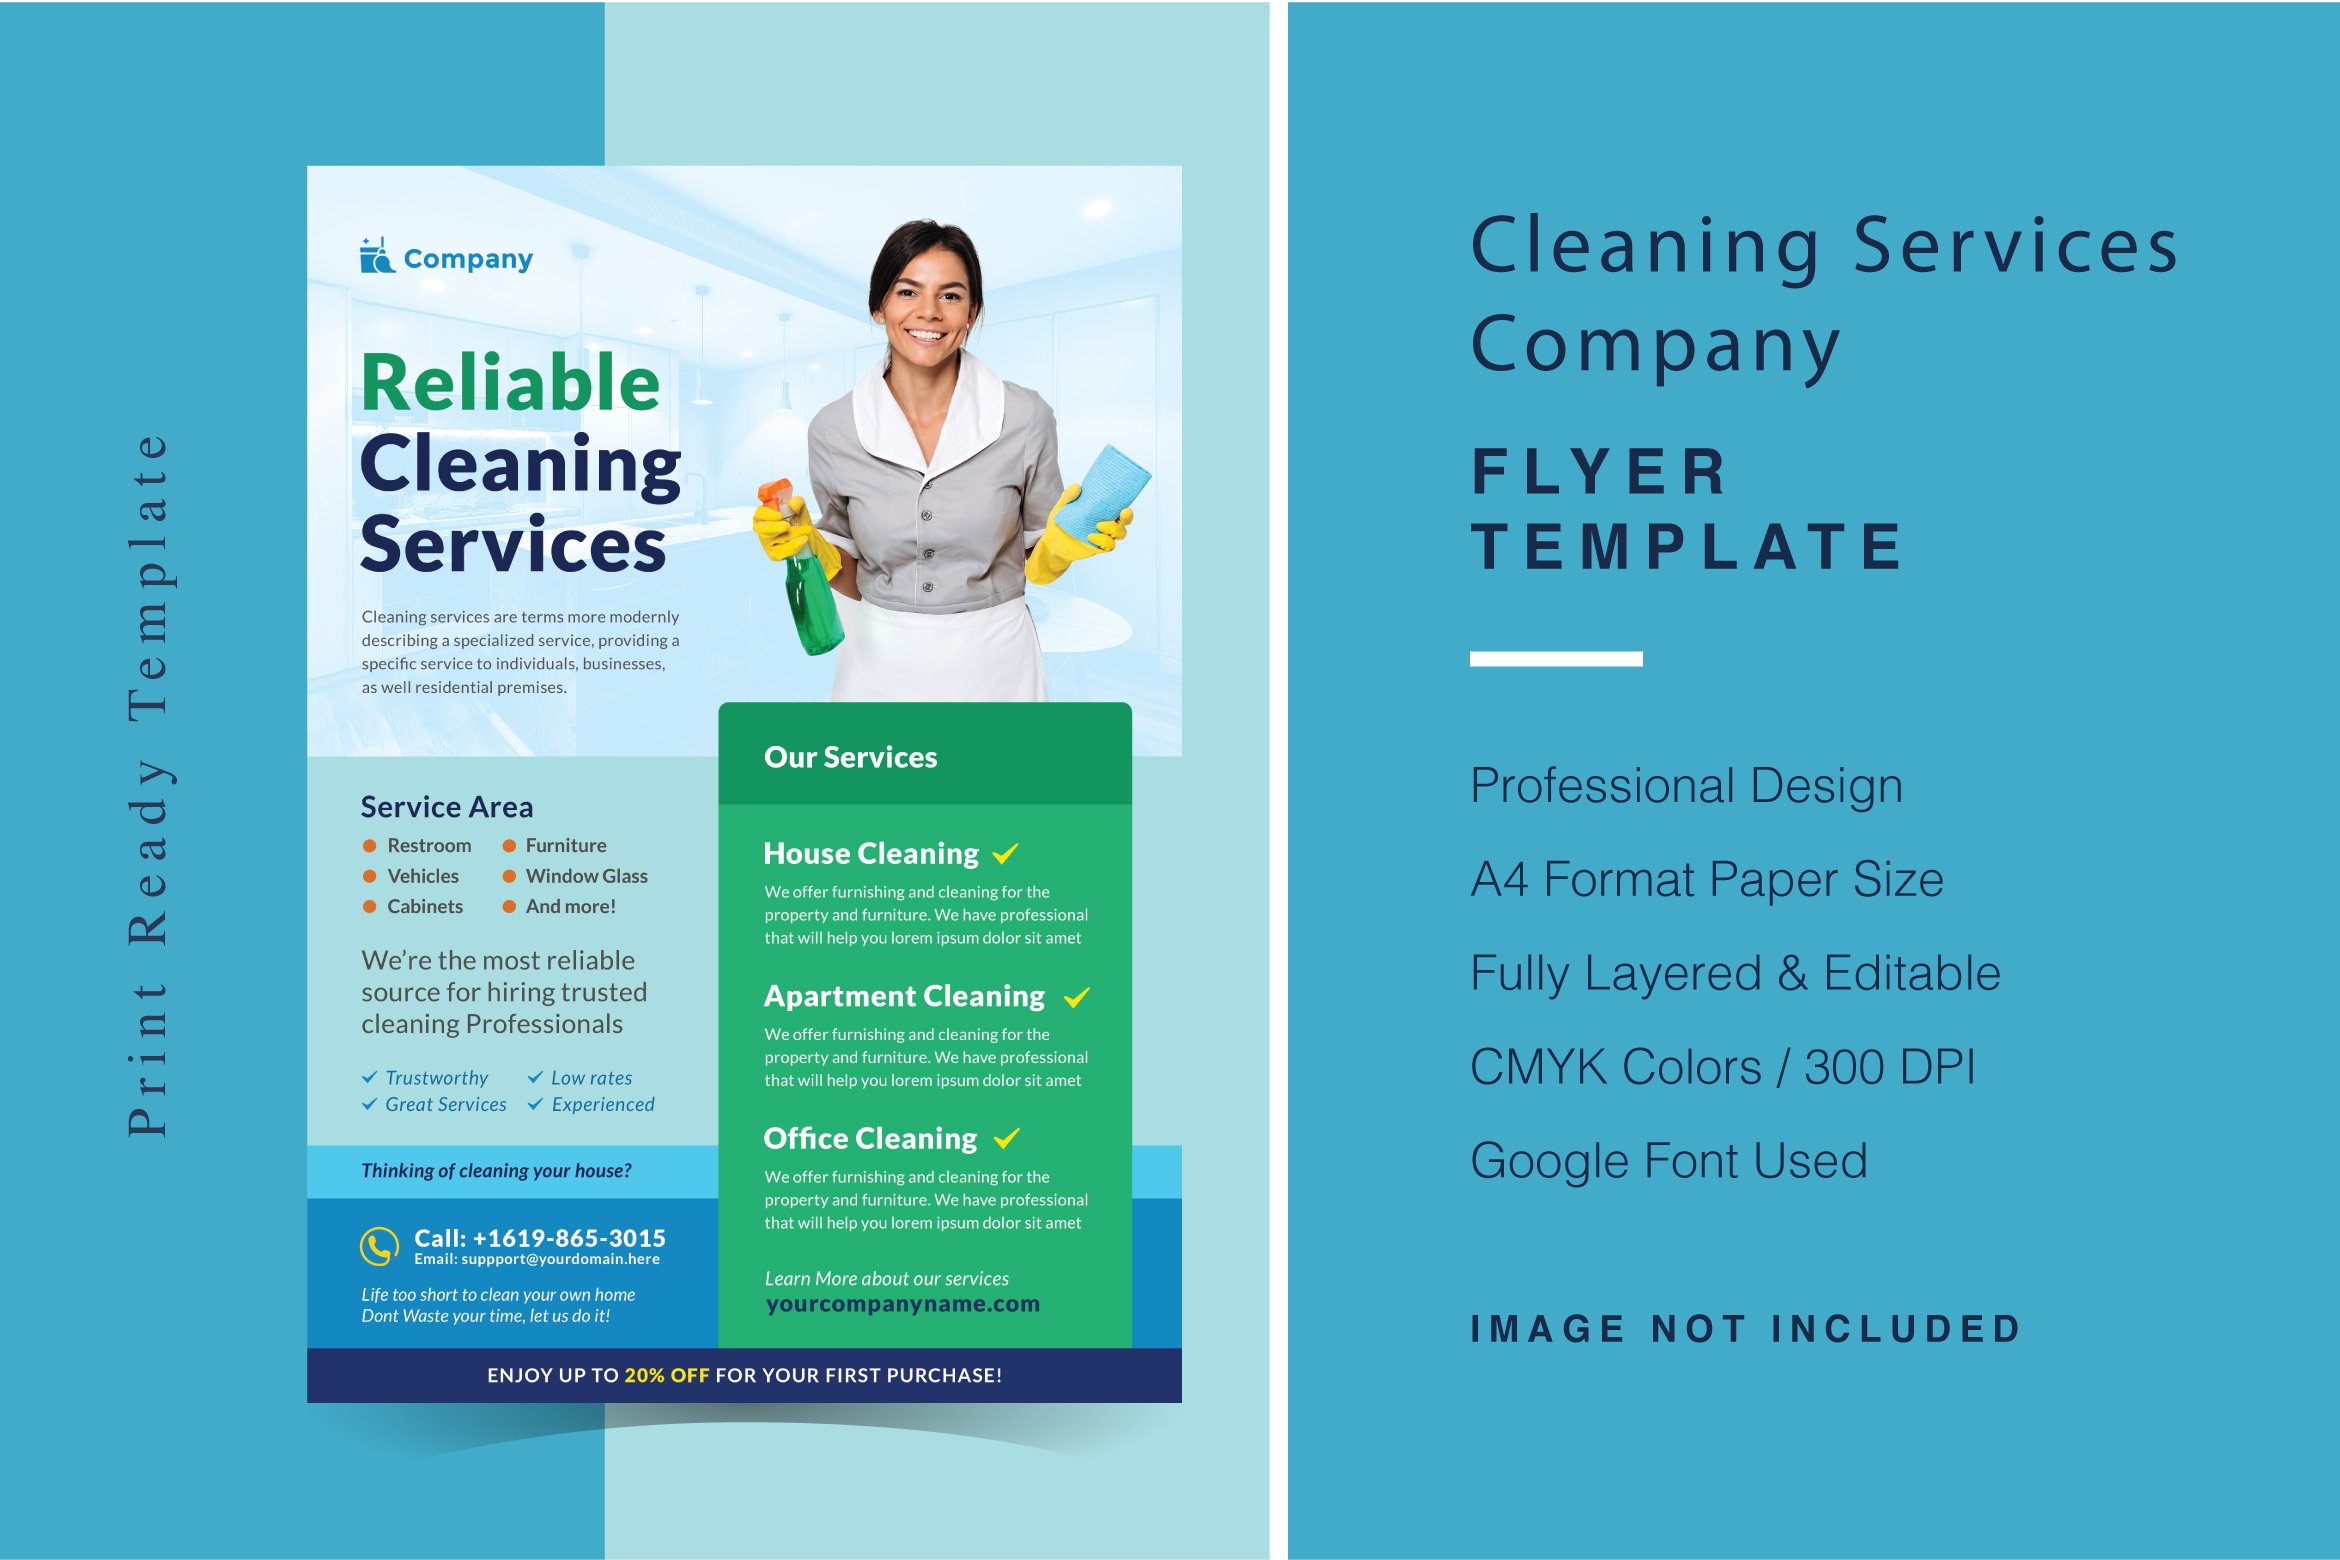 Cleaning Services Company Flyer cover image.